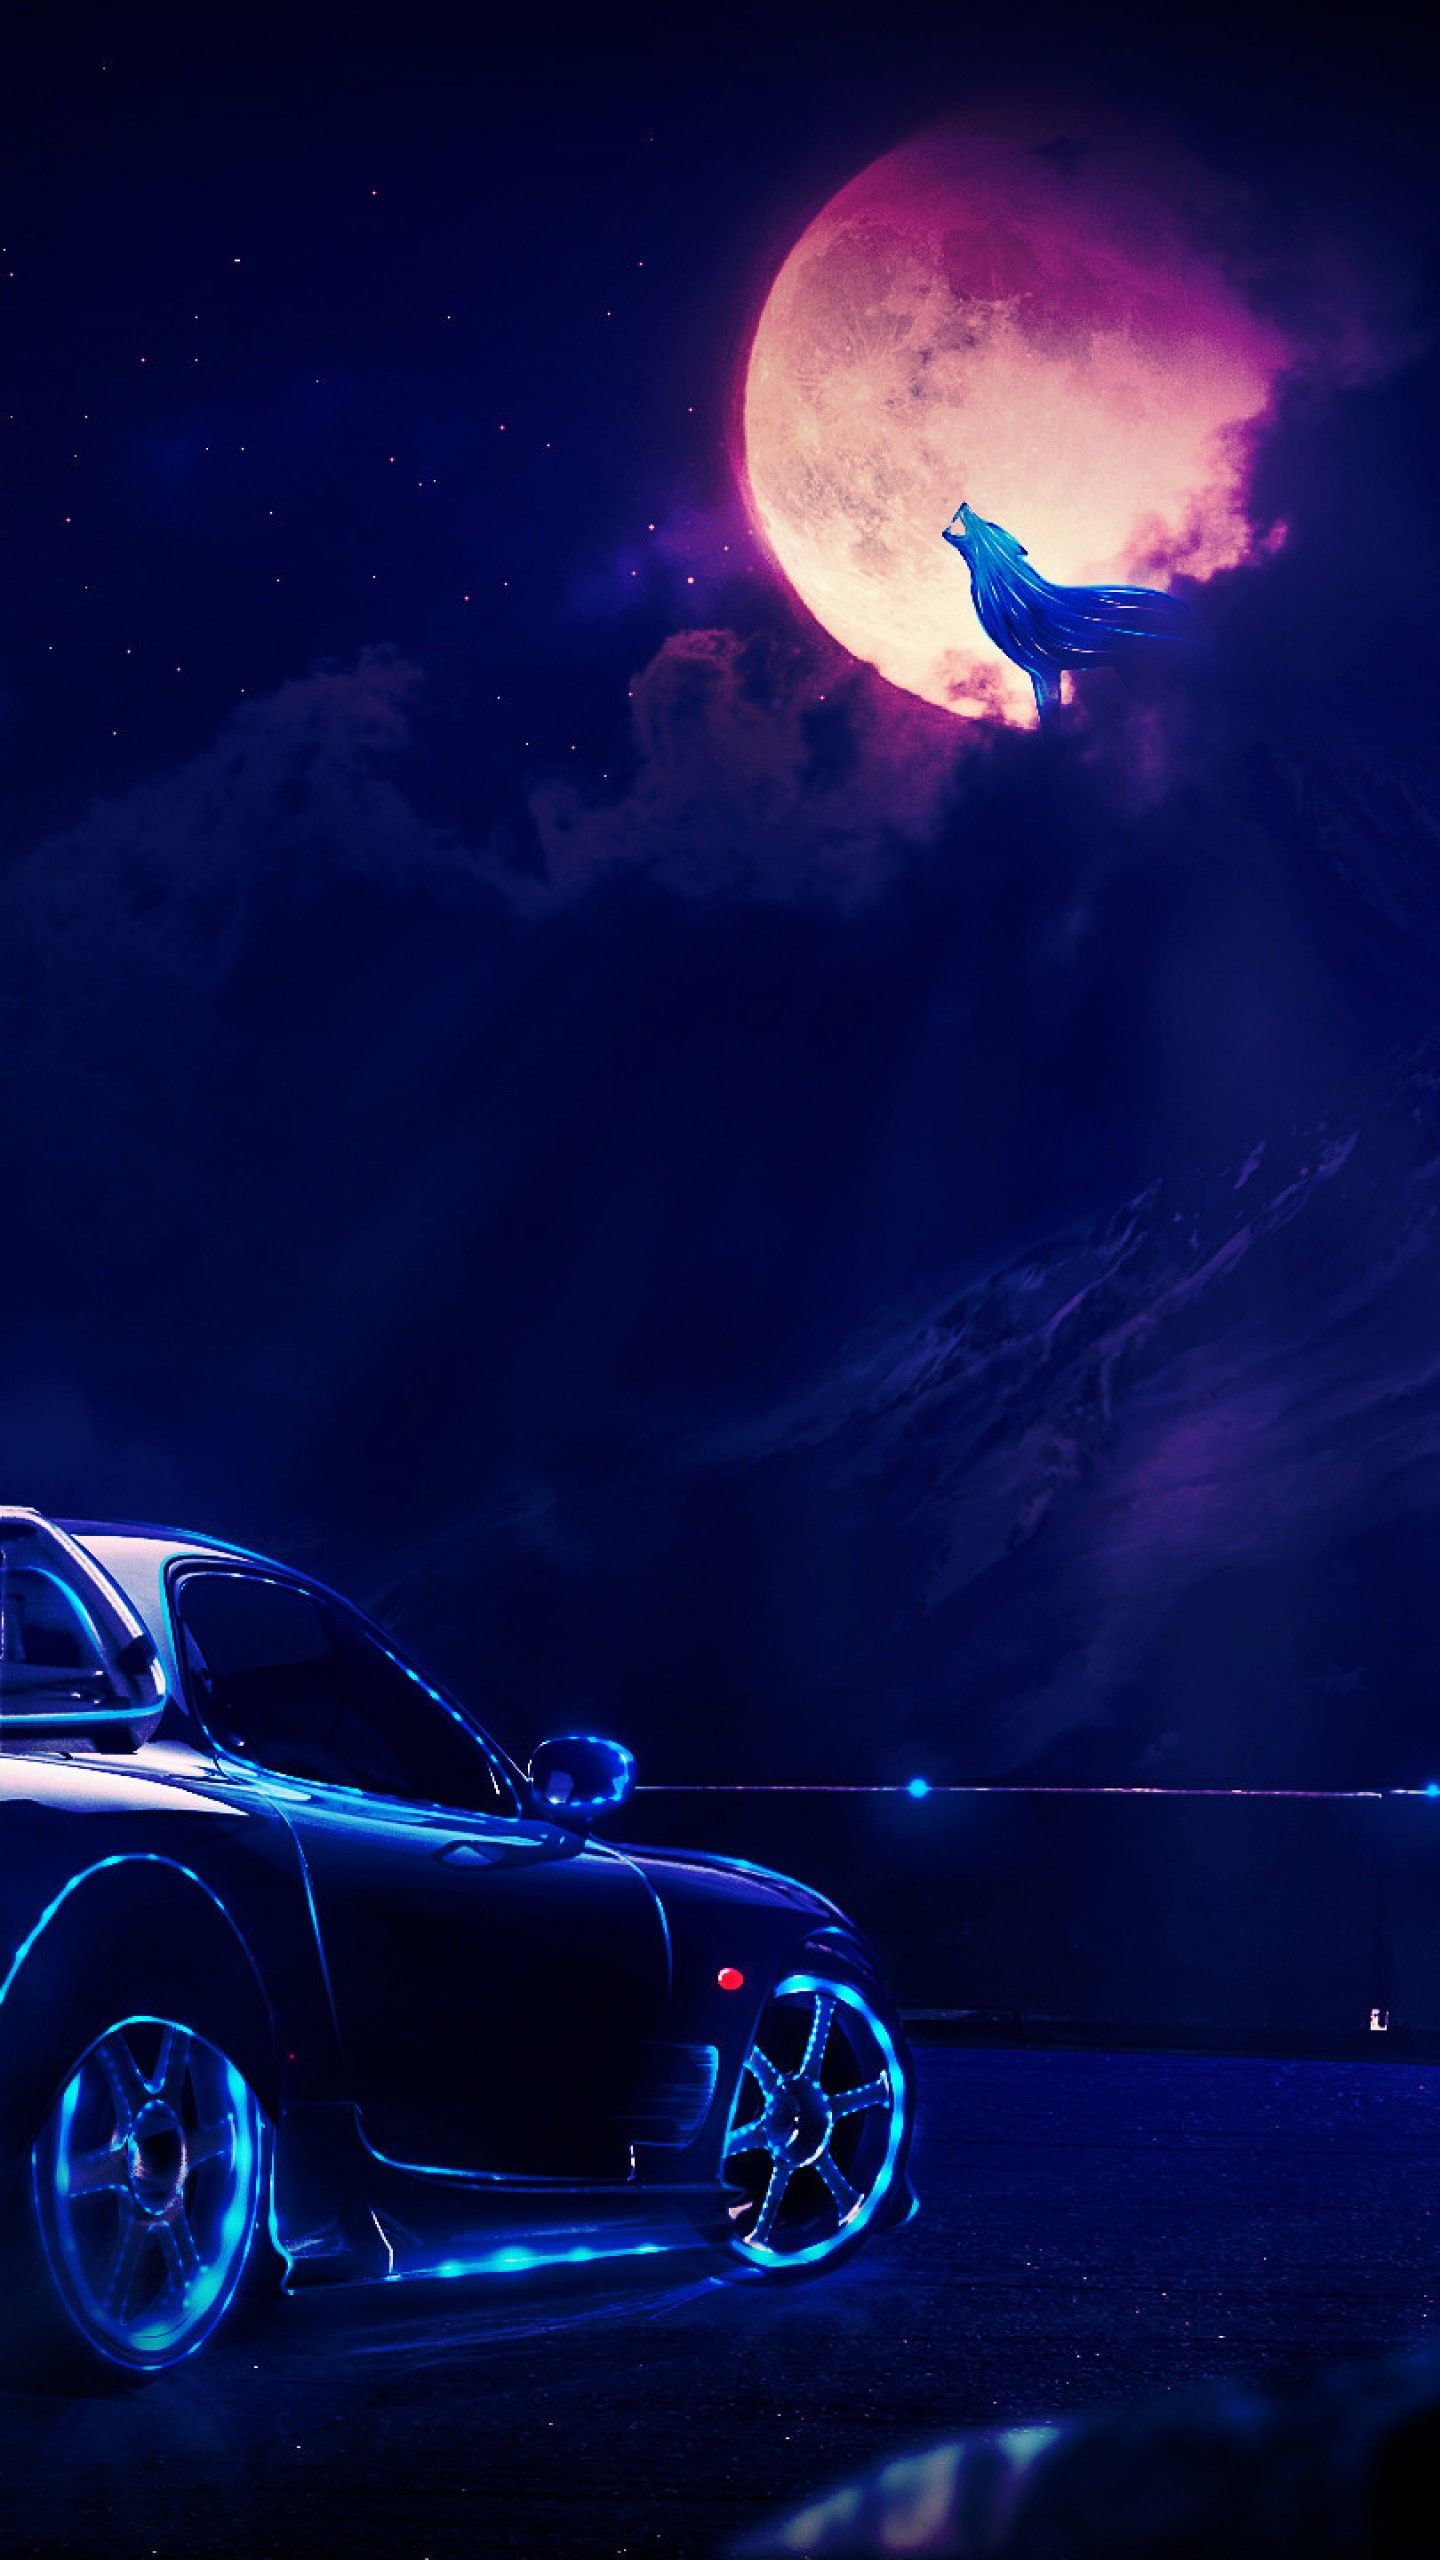 Wallpaper Sports car, Neon, Night, Moon, Wolf, HD, Creative Graphics,. Wallpaper for iPhone, Android, Mobile and Desktop